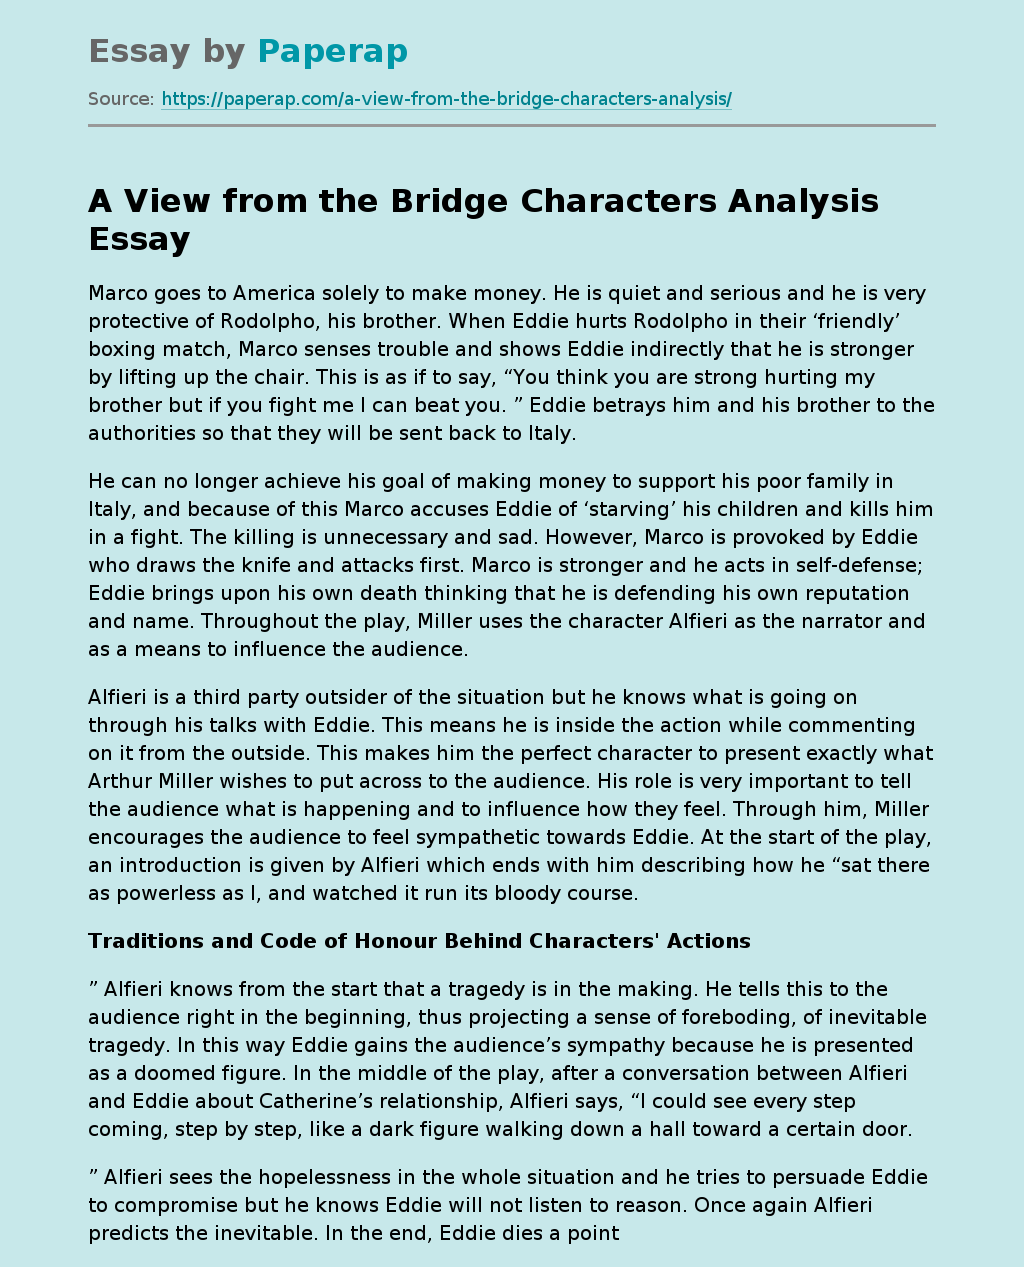 A View from the Bridge Characters Analysis